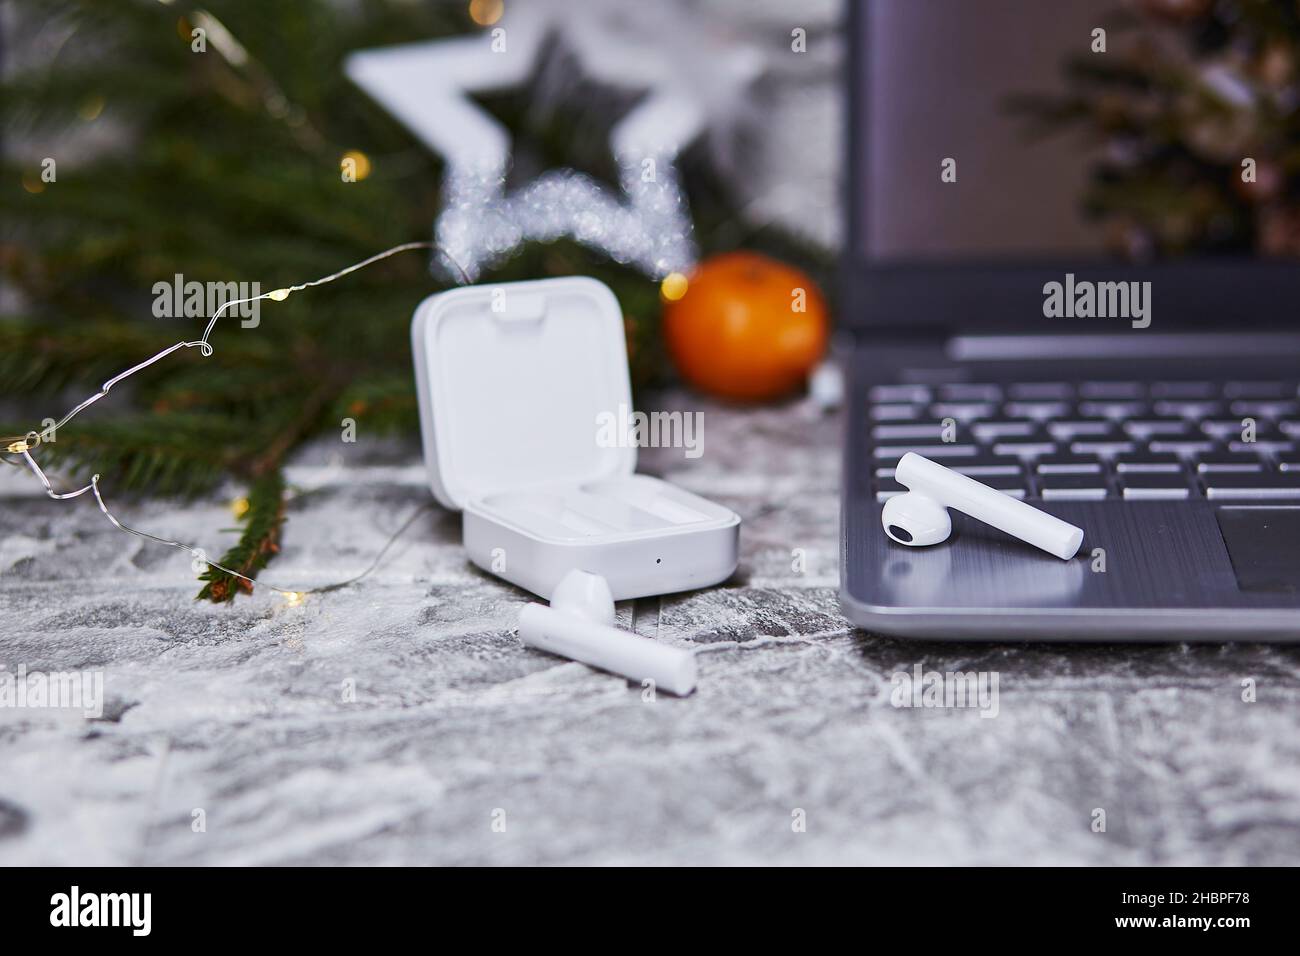 Wireless earphones and laptop near Christmas decorations. Freelance, remote work, taking webinar, calling to family concept. Christmas, New Year's pre Stock Photo